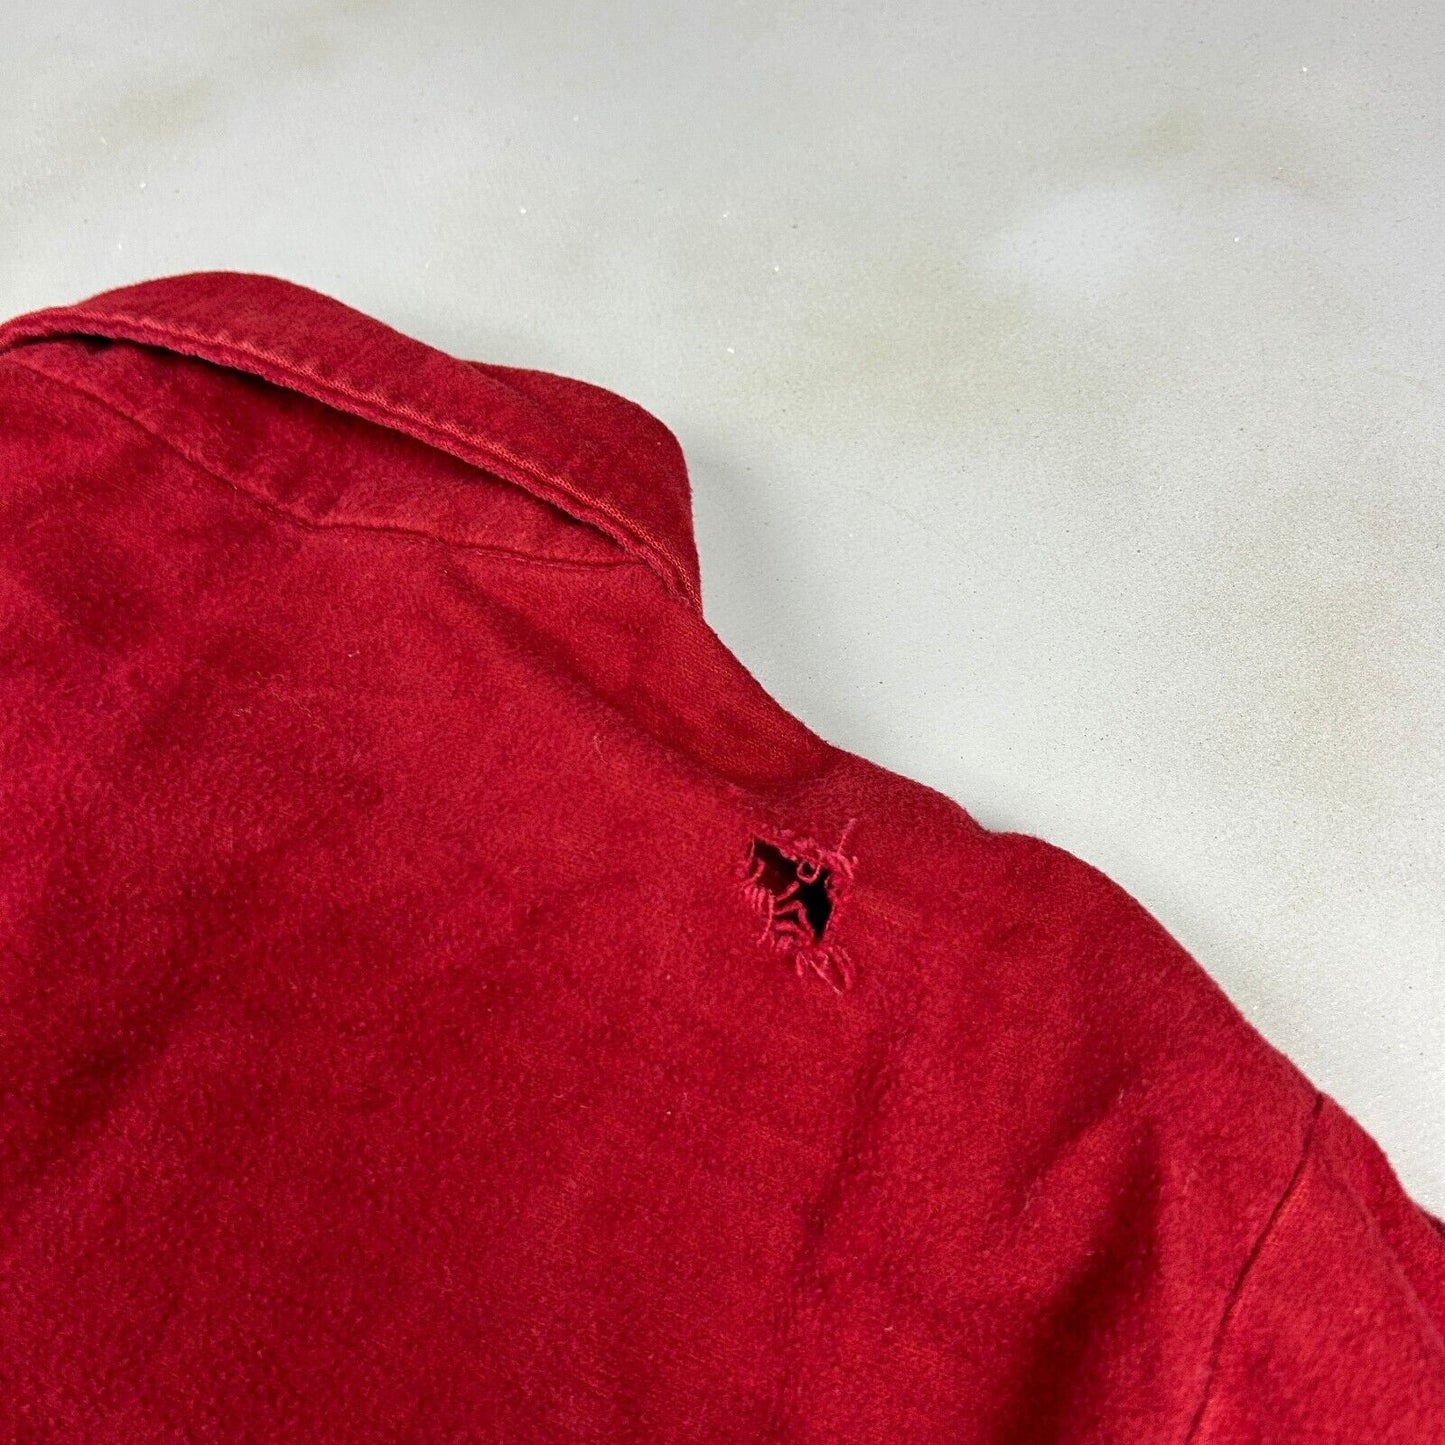 VINTAGE 90s Frostproof Red Chamois Cloth Button Up Shirt sz Large Adult